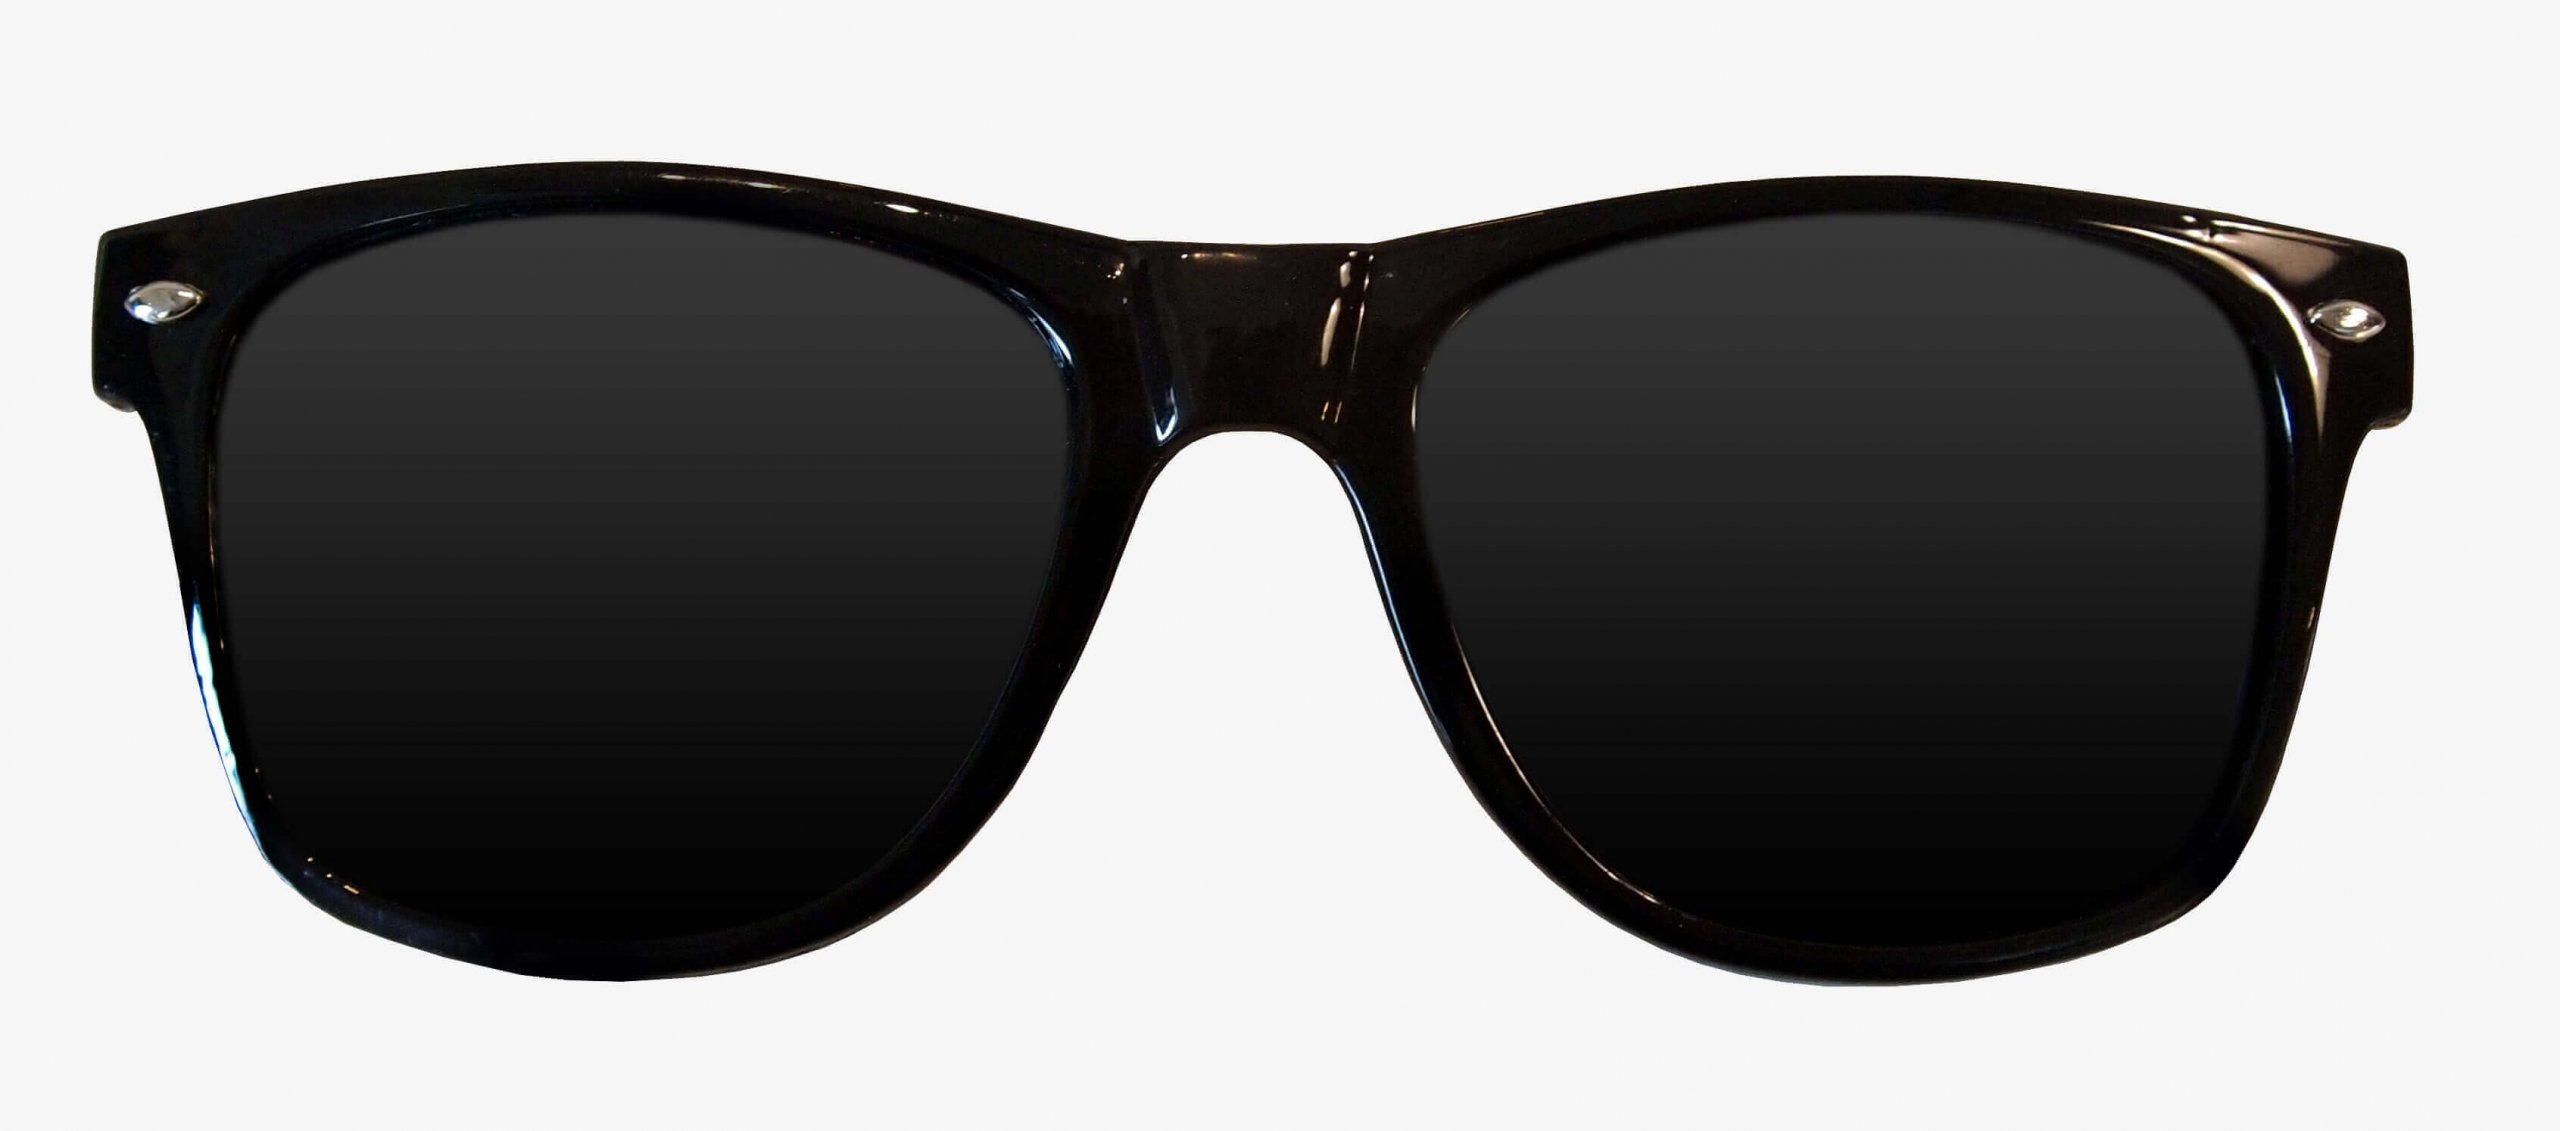 Make a Cool Statement with Promotional Sunglasses